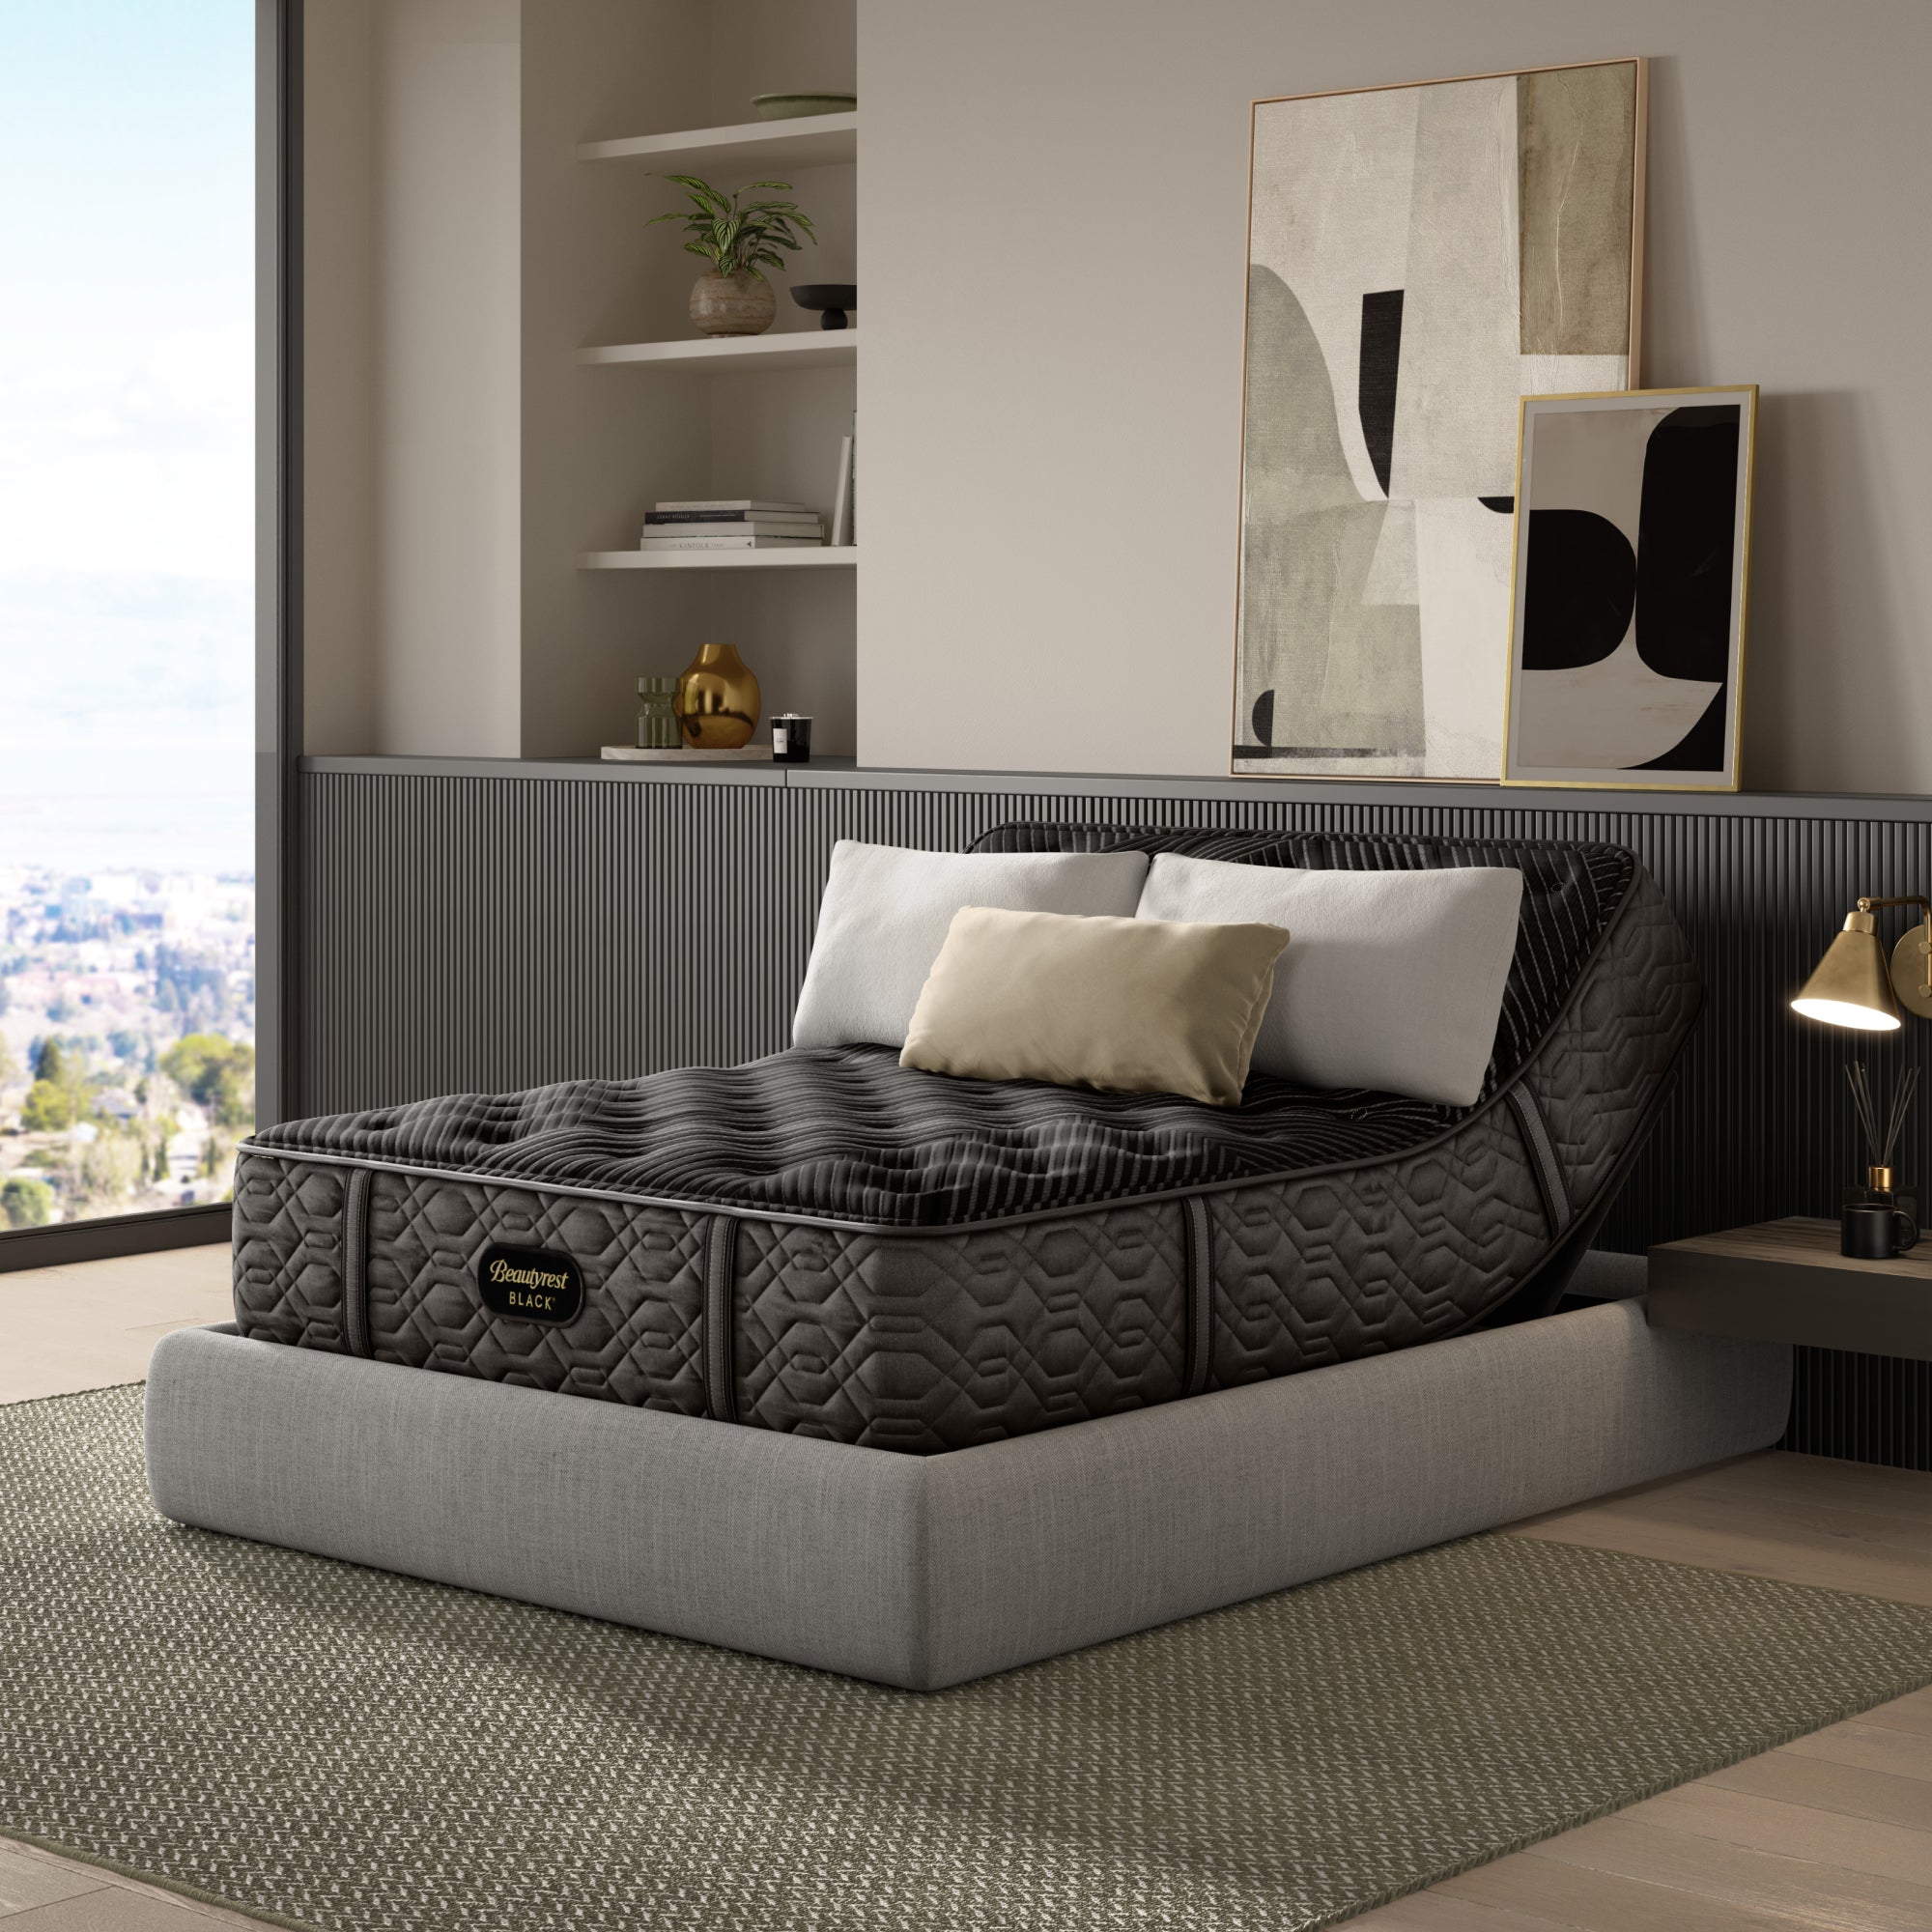 The Beautyrest Black mattress in a bedroom on a light greay bed frame || series: Series One